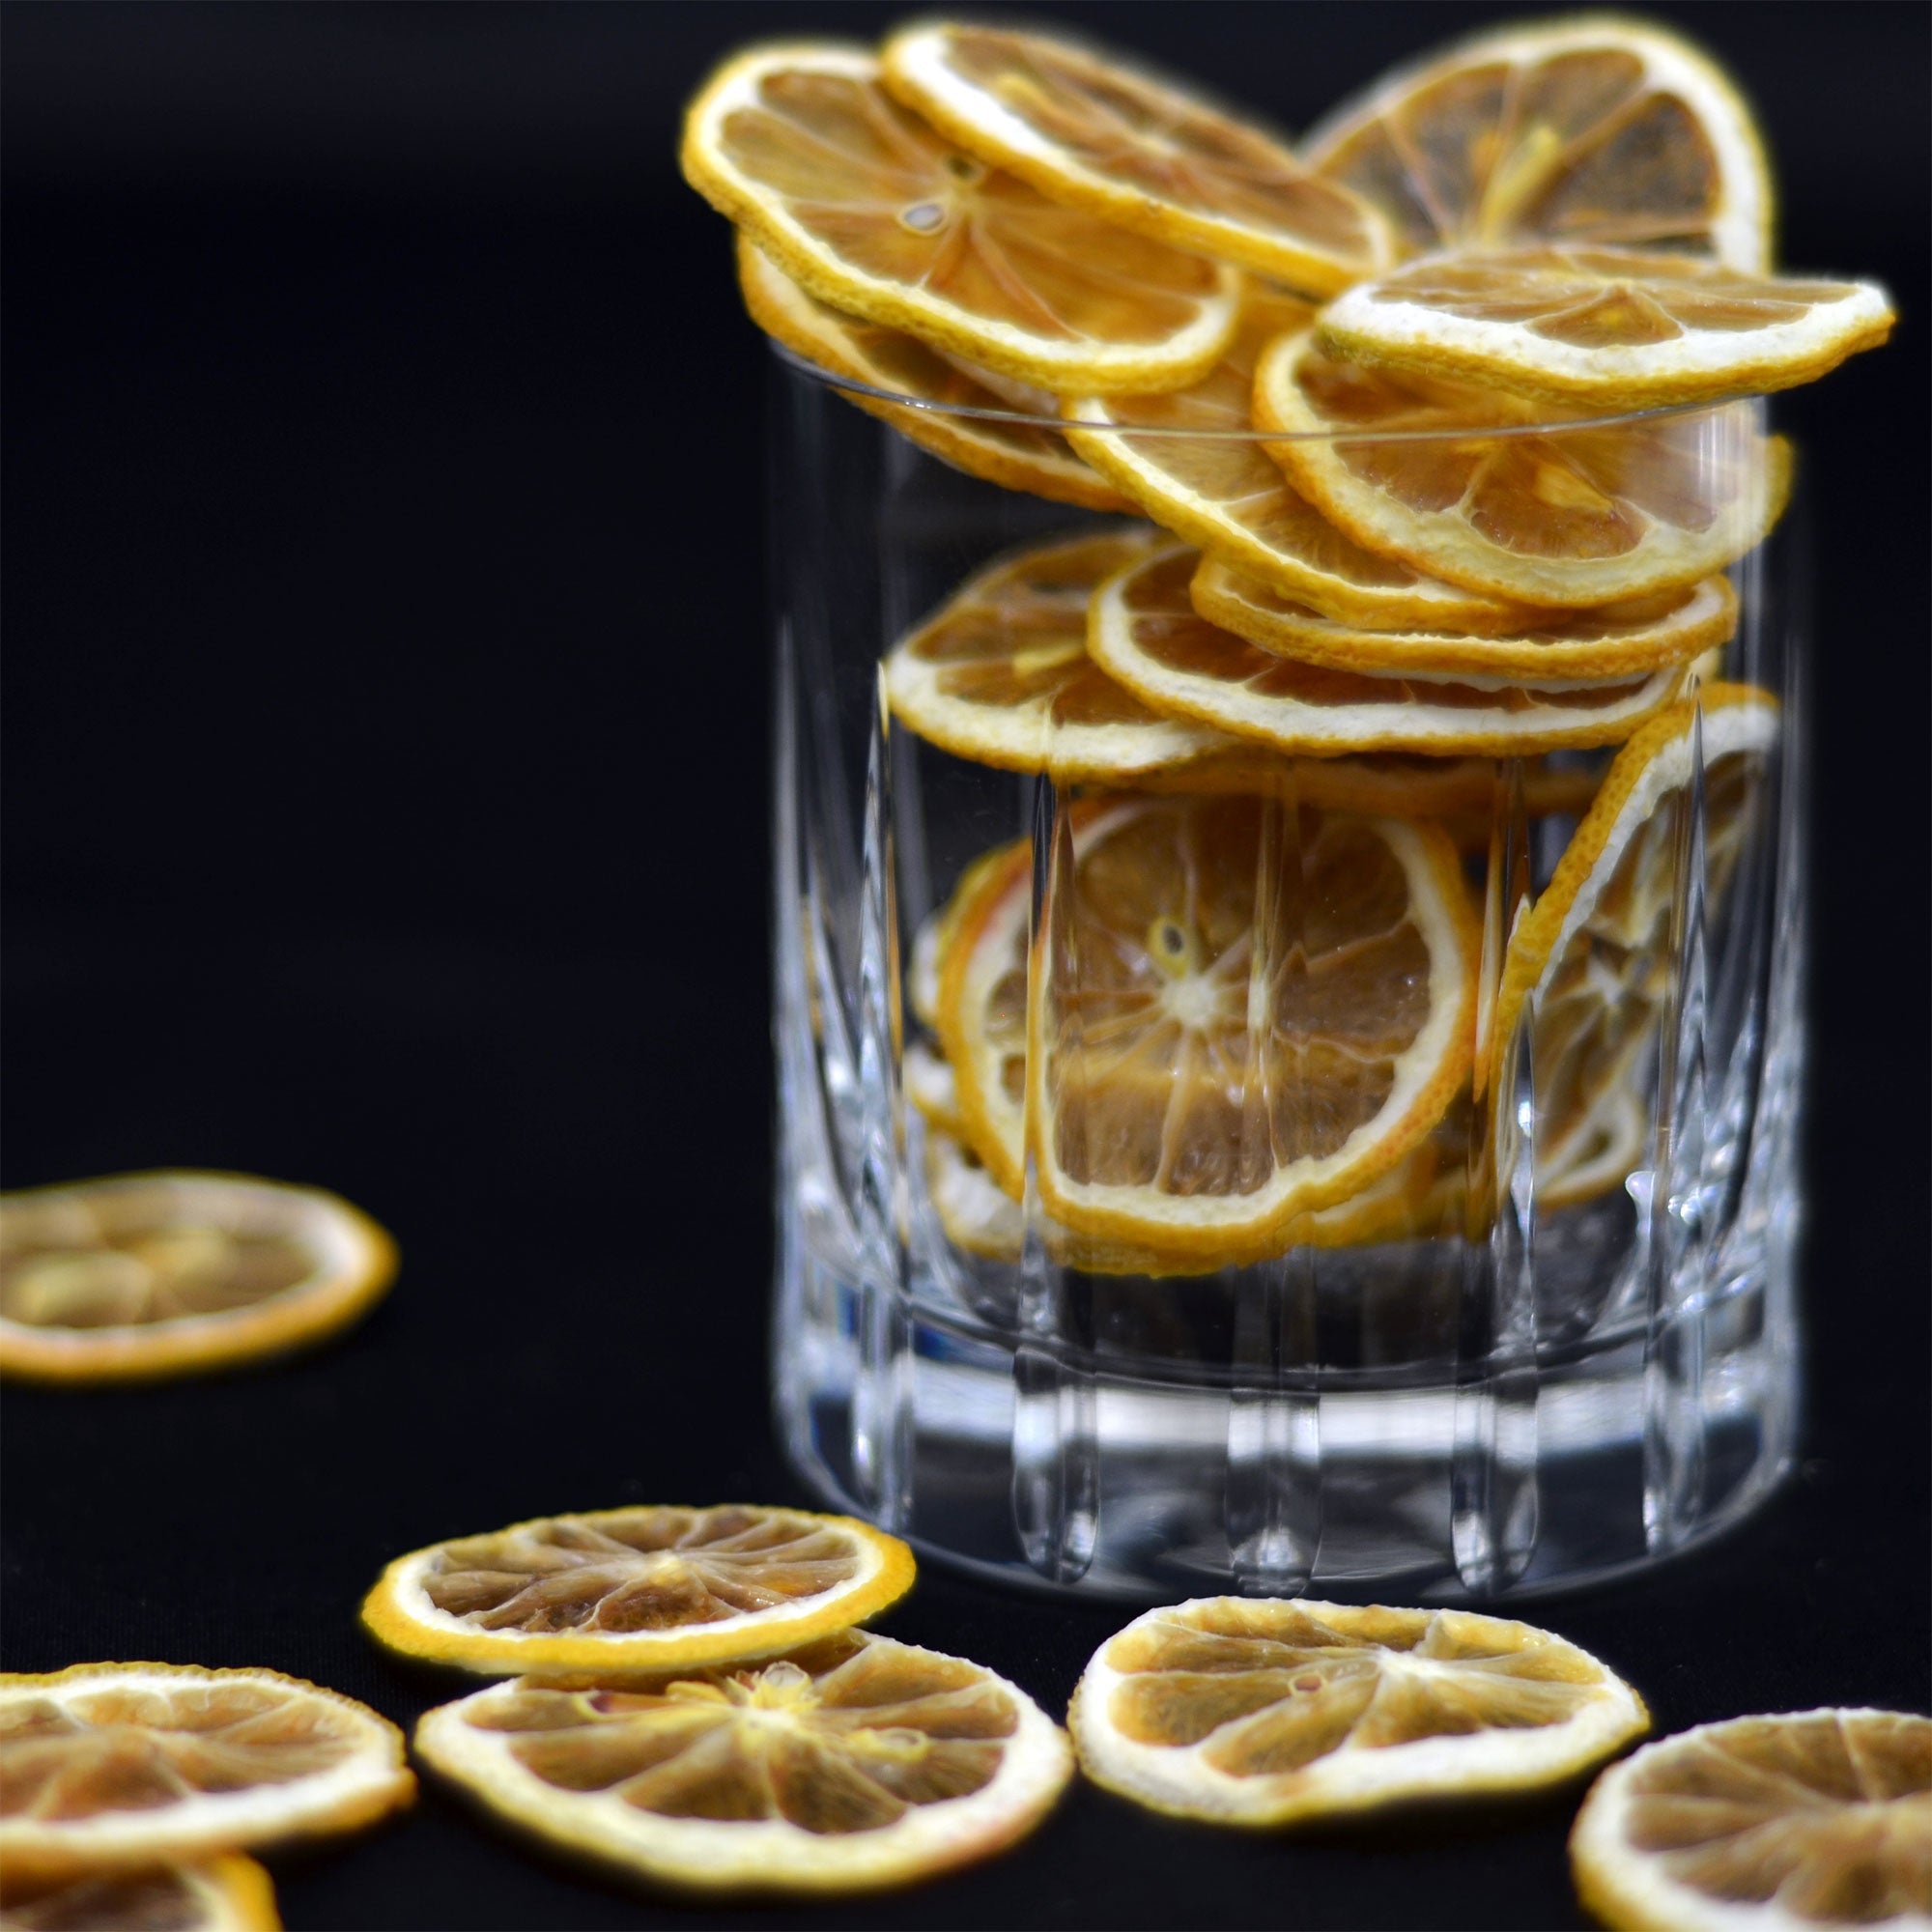  Dried Lemon Slices, Dehydrated Lemon Slices, Dehydrated fruit  for Cocktail Garnishes for Drinks Dry Lemon Slices Decor & Dried Fruit  Wheels For Christmas Garland/Potpourri/Tea/Crafts/Candles : Grocery &  Gourmet Food